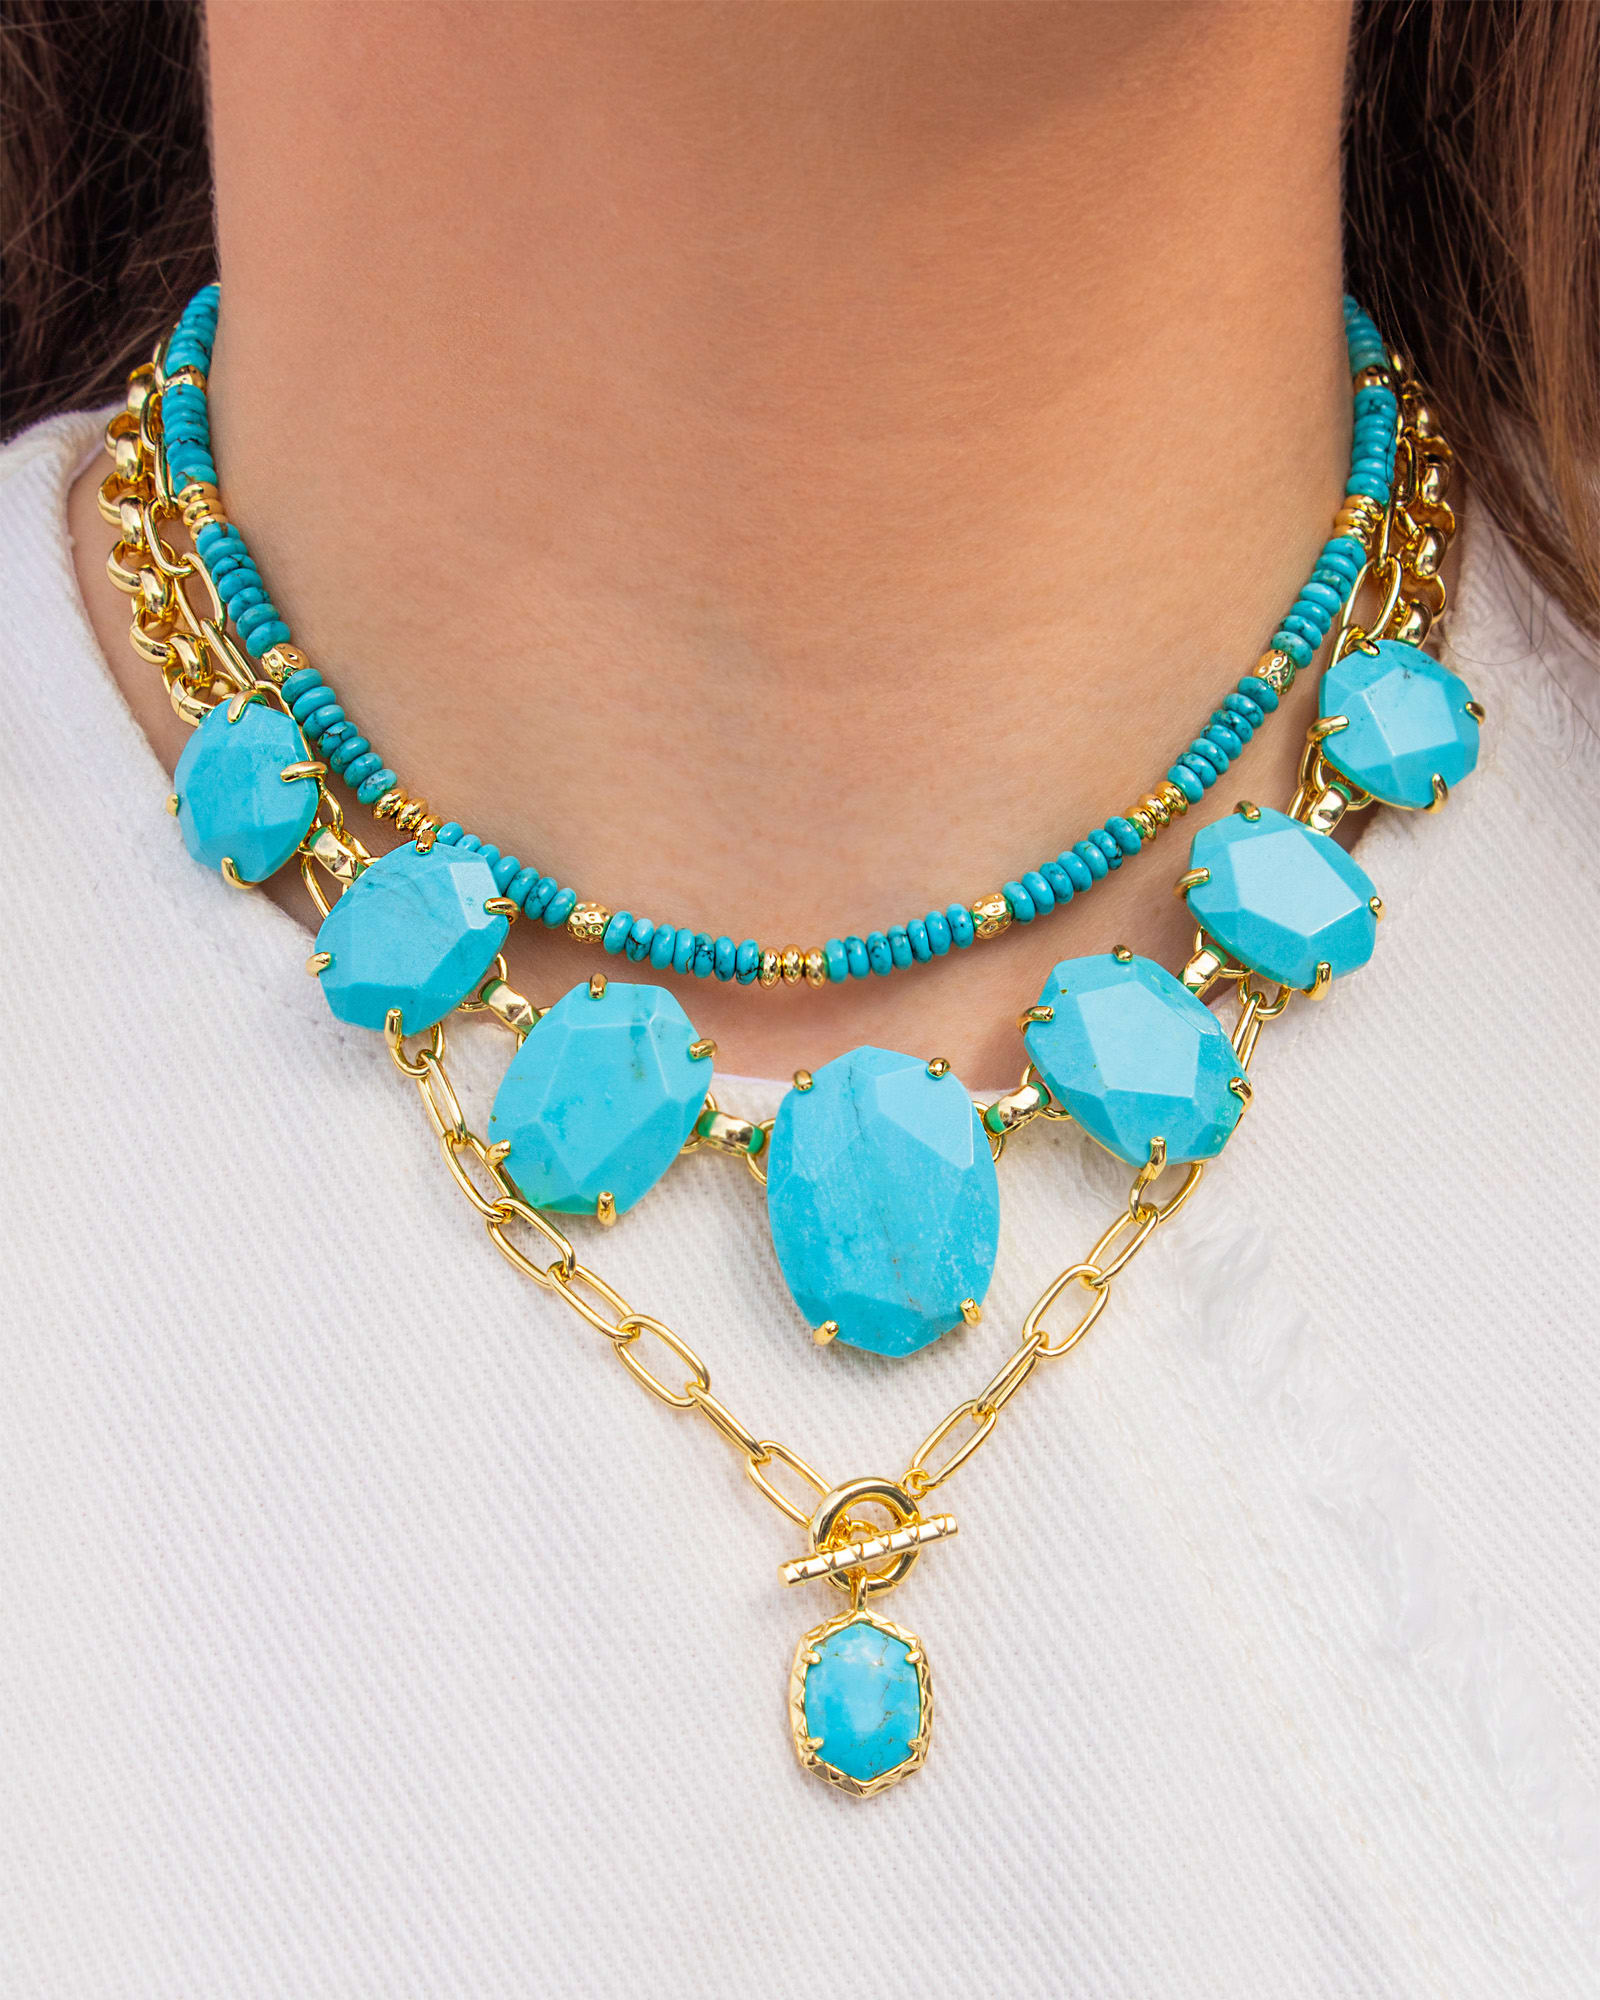 Daphne Gold Statement Necklace in Variegated Turquoise Magnesite